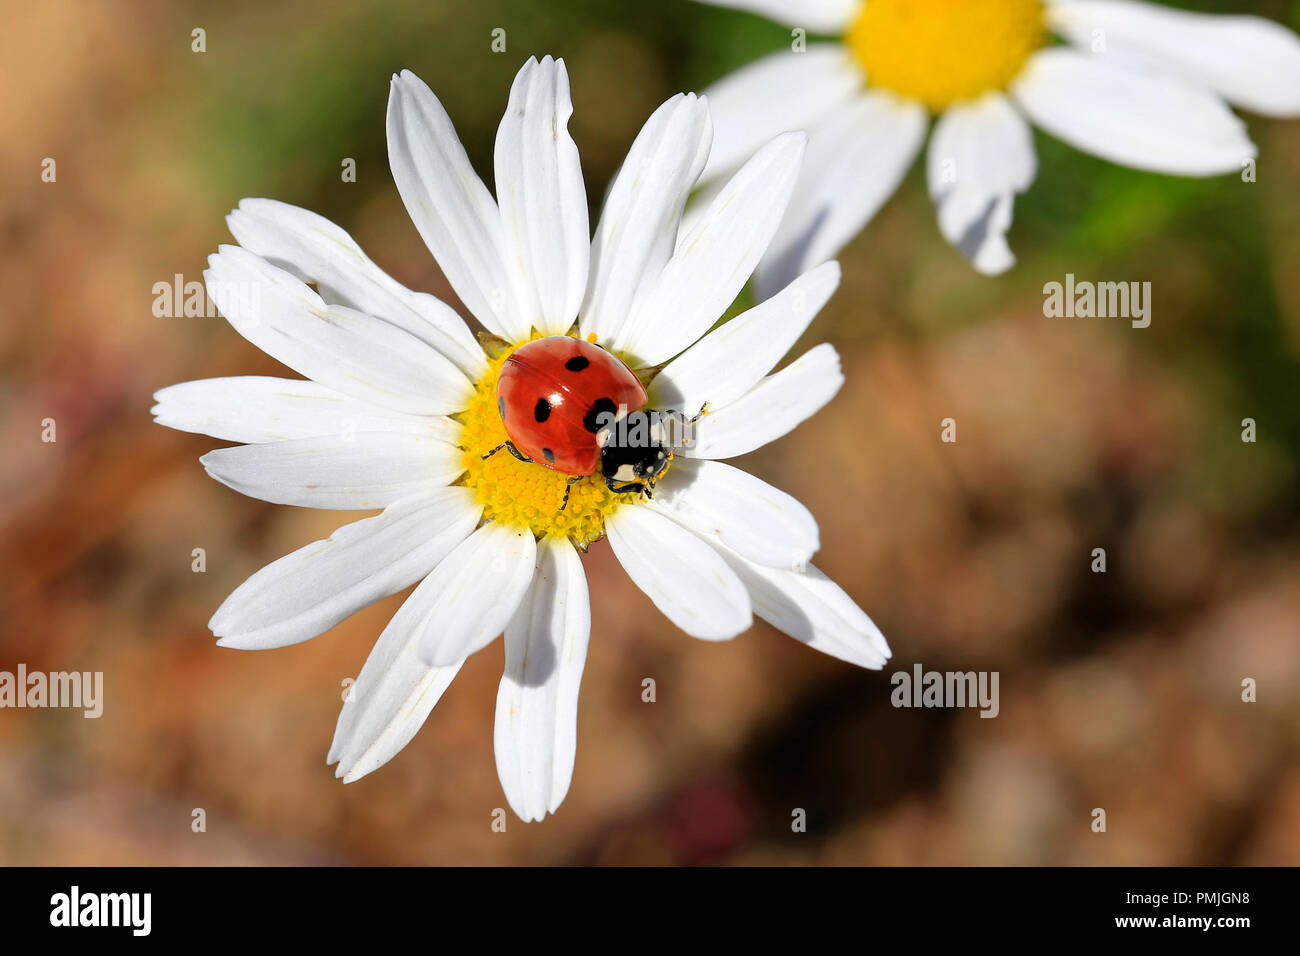 Seven Spotted Ladybug, Coccinella septempunctata, on the yellow florets of an Oxeye Daisy flower. Stock Photo